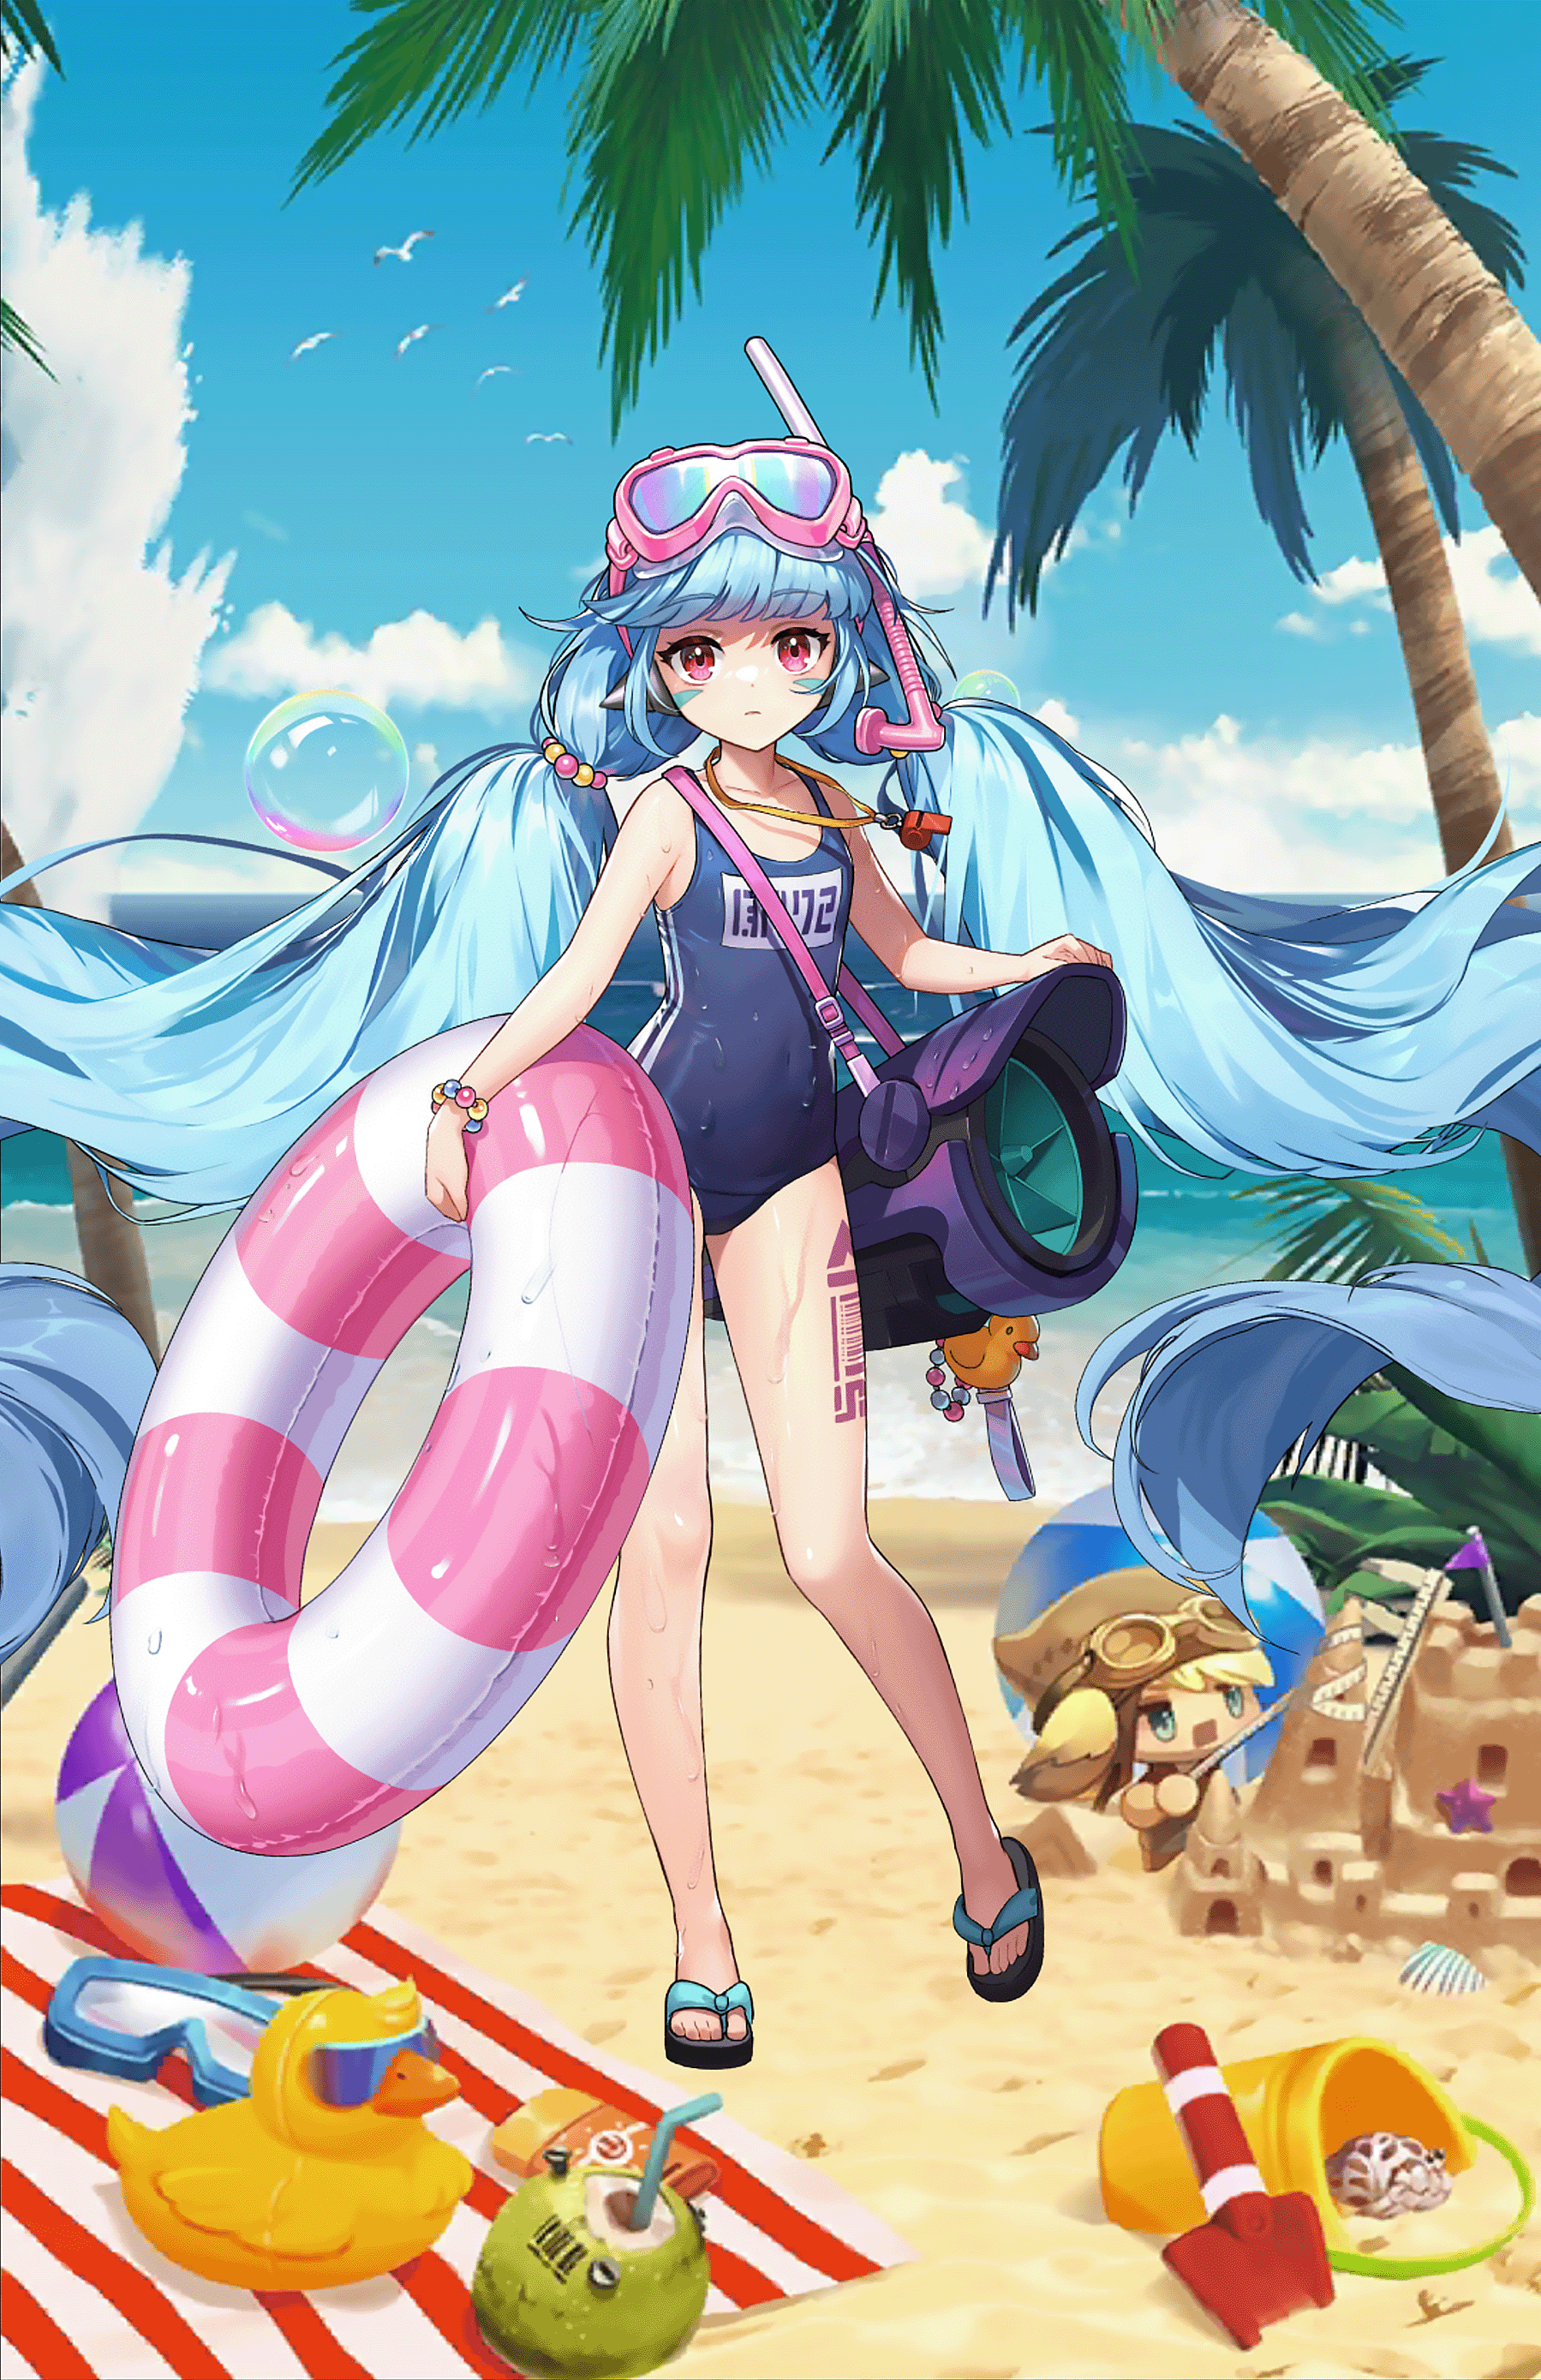 Anime 1799x2778 Guardian Tales Android AA72 (Guardian Tales) life preserver anime anime girls women on beach swimwear sand palm trees floater scuba diving